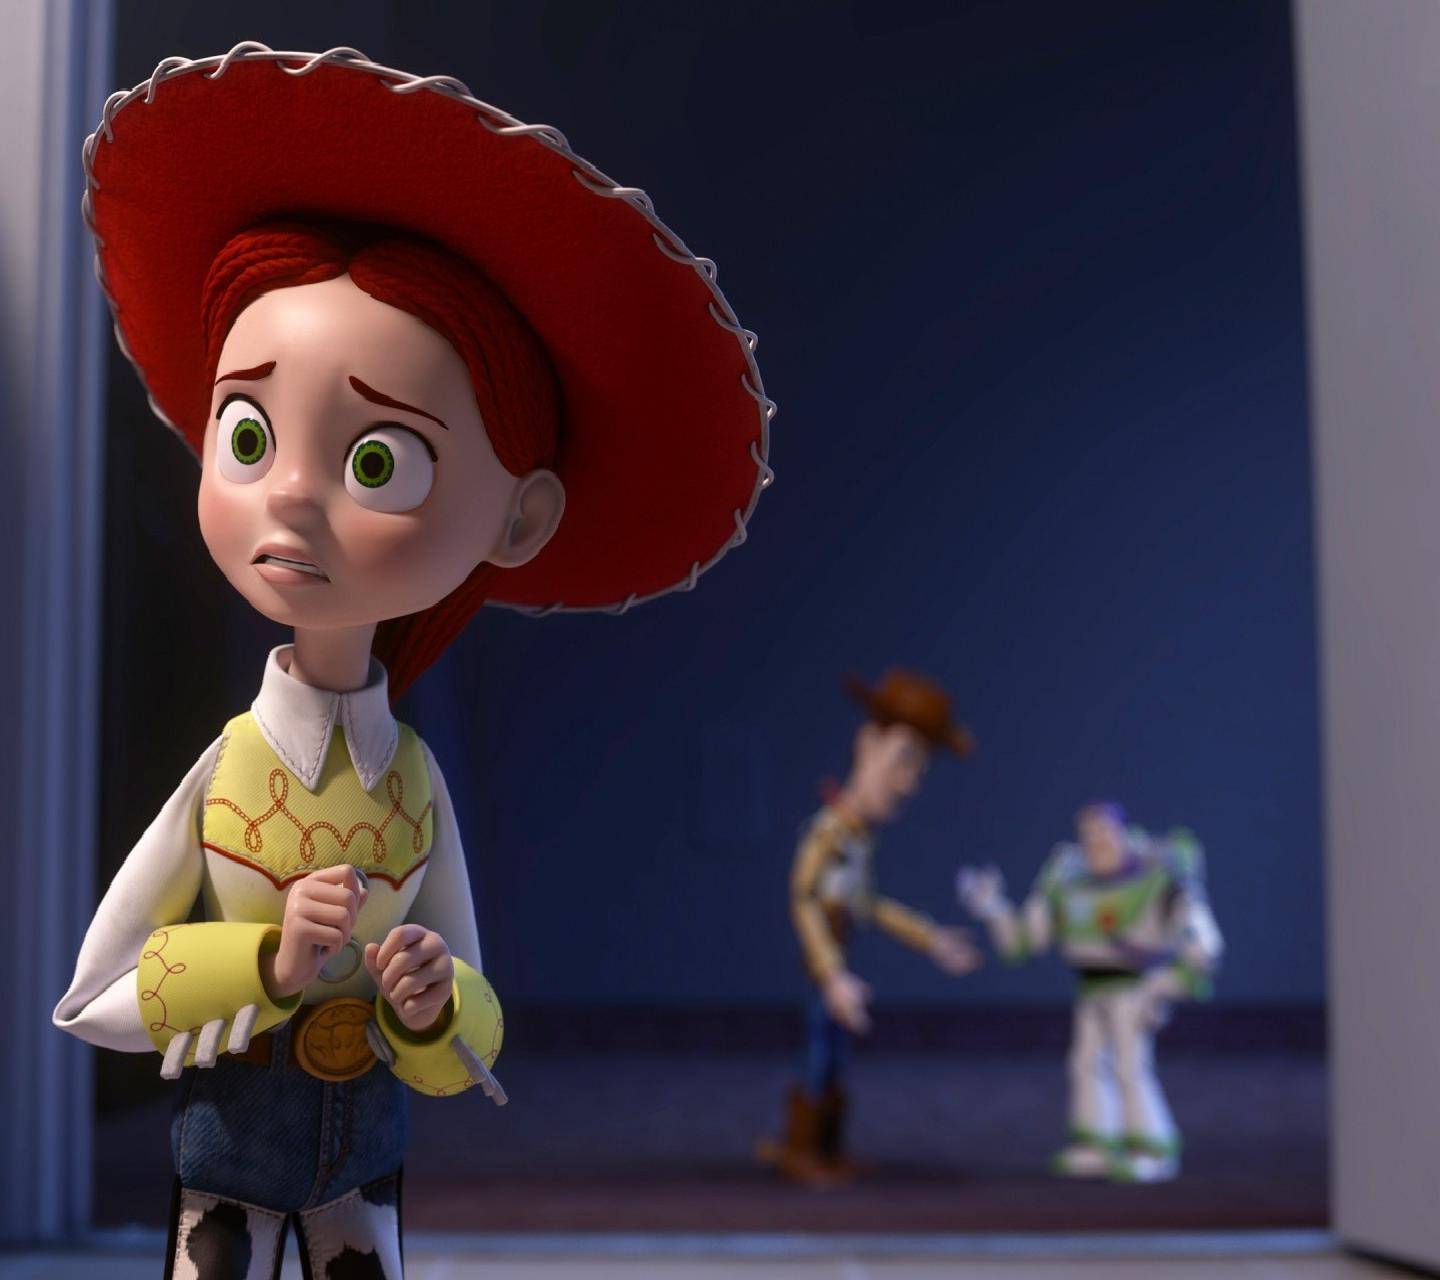 Jessie Toy Story Wallpapers - Top Free Jessie Toy Story Backgrounds ...